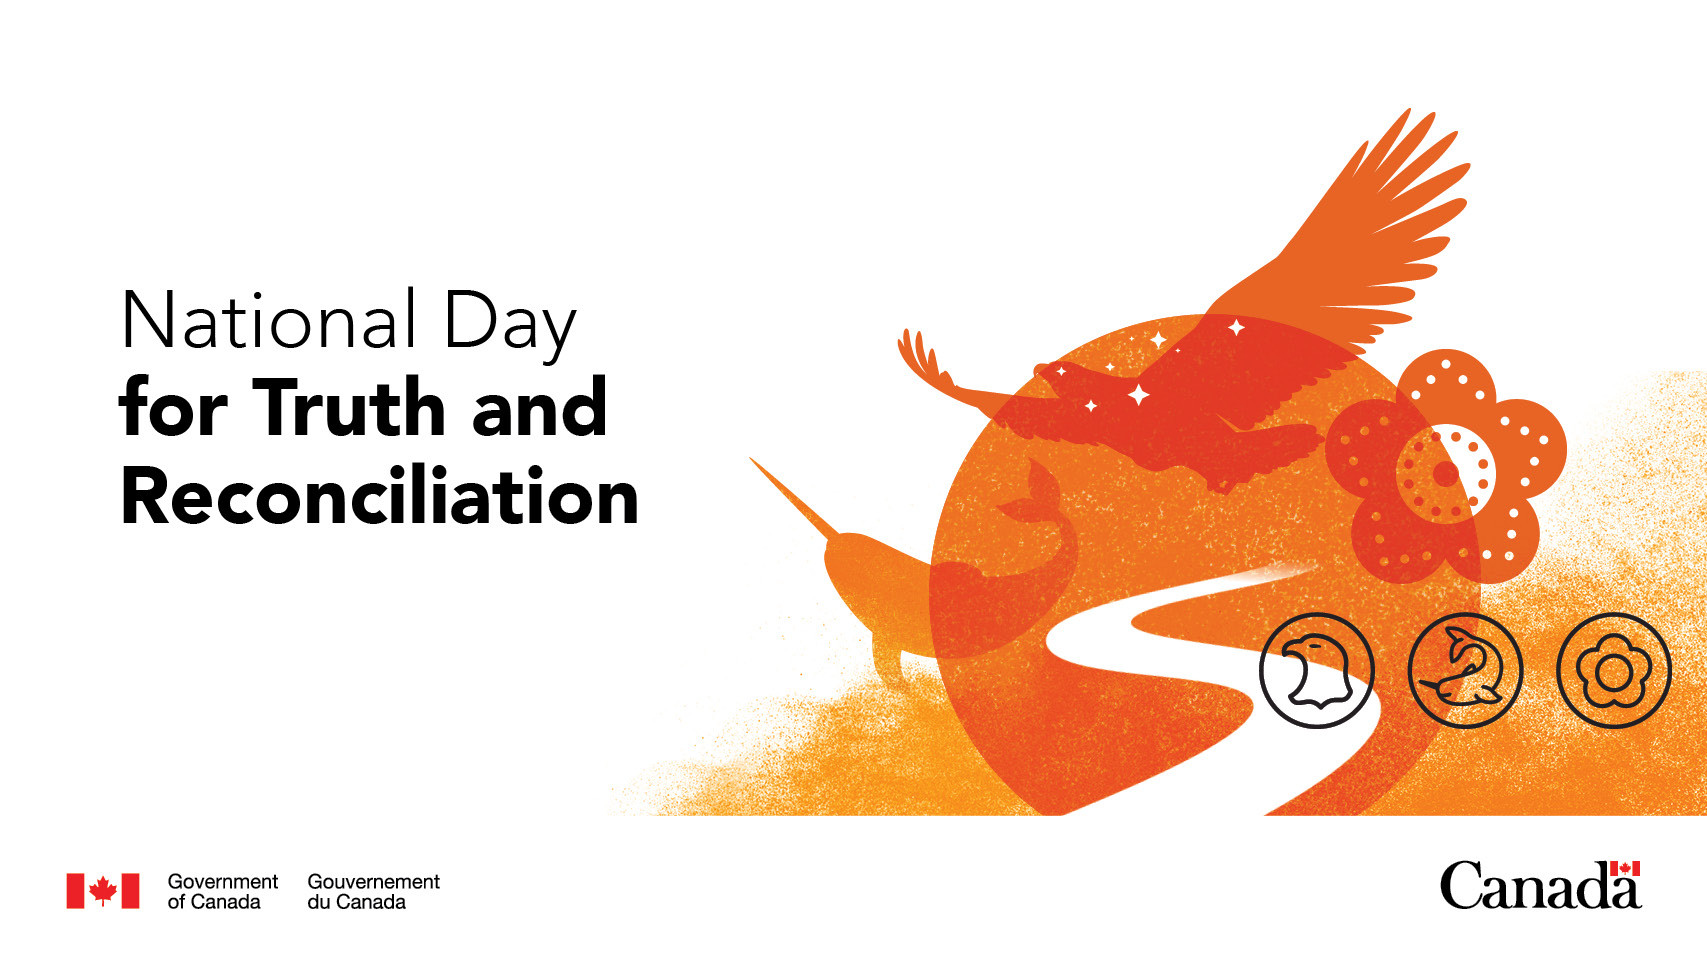 National Day for Truth and Reconciliation imagery in orange, including the eagle to represent First Nations peoples; the narwhal to represent Inuit and the violin to represent Métis peoples